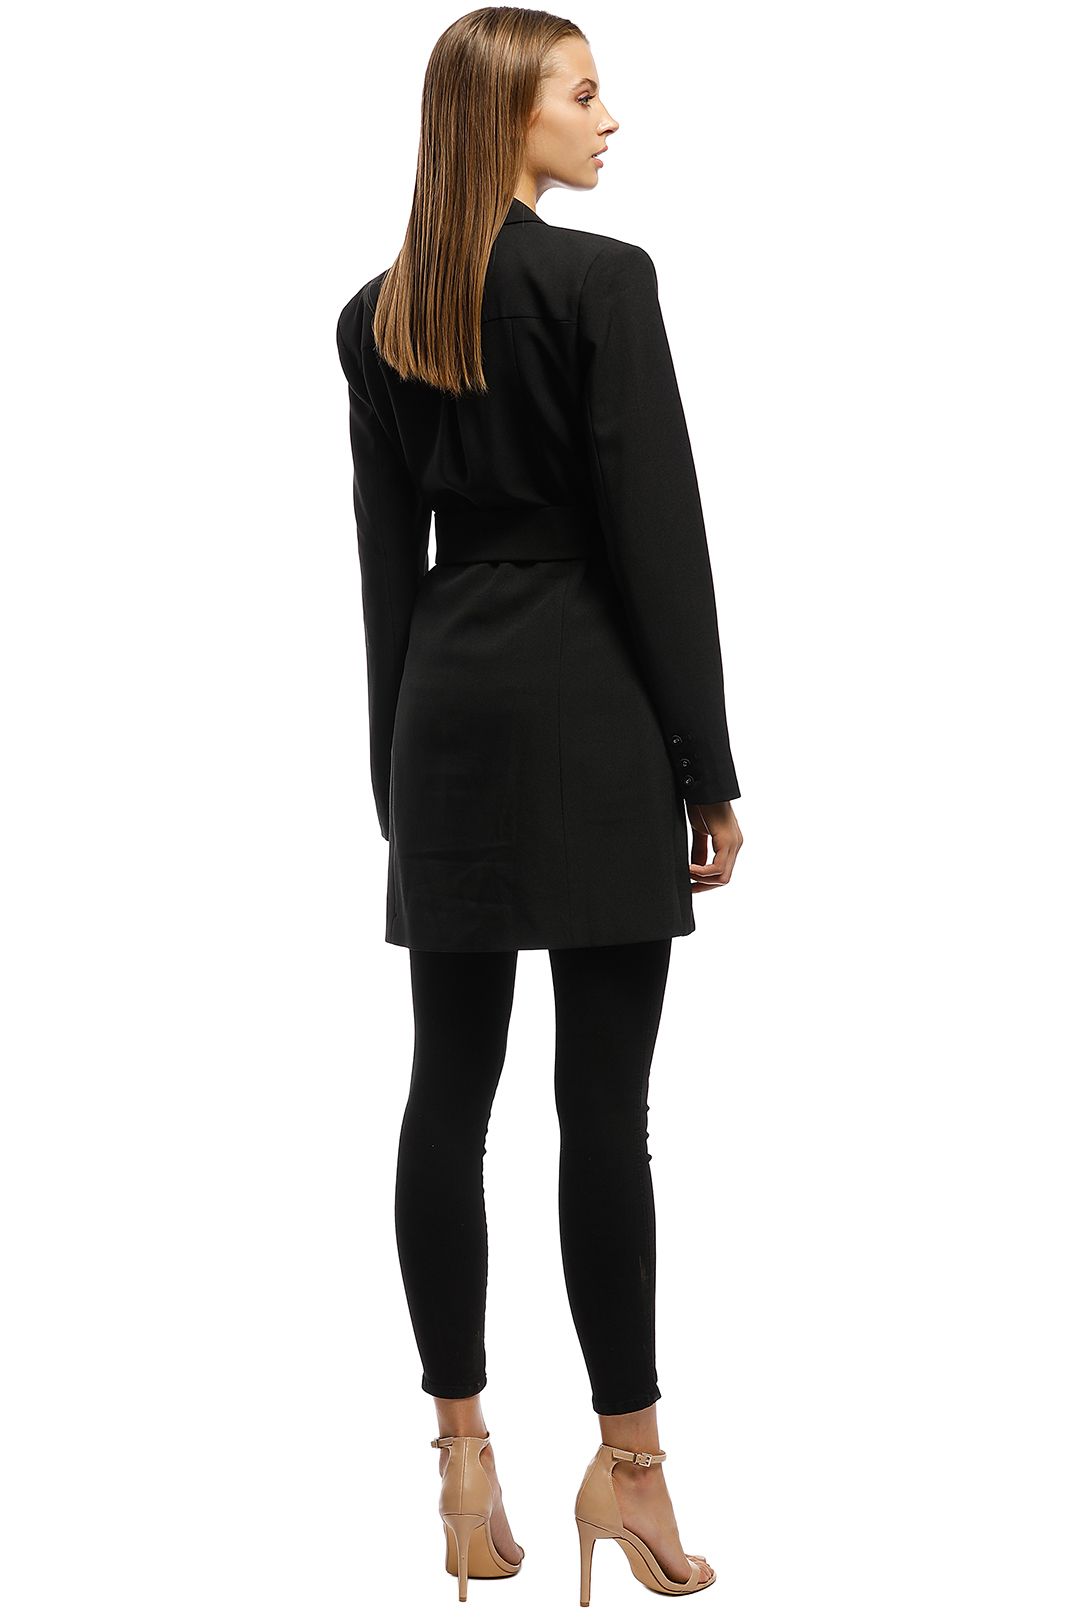 CMEO Collective - Mode LS Dress - Black - Back